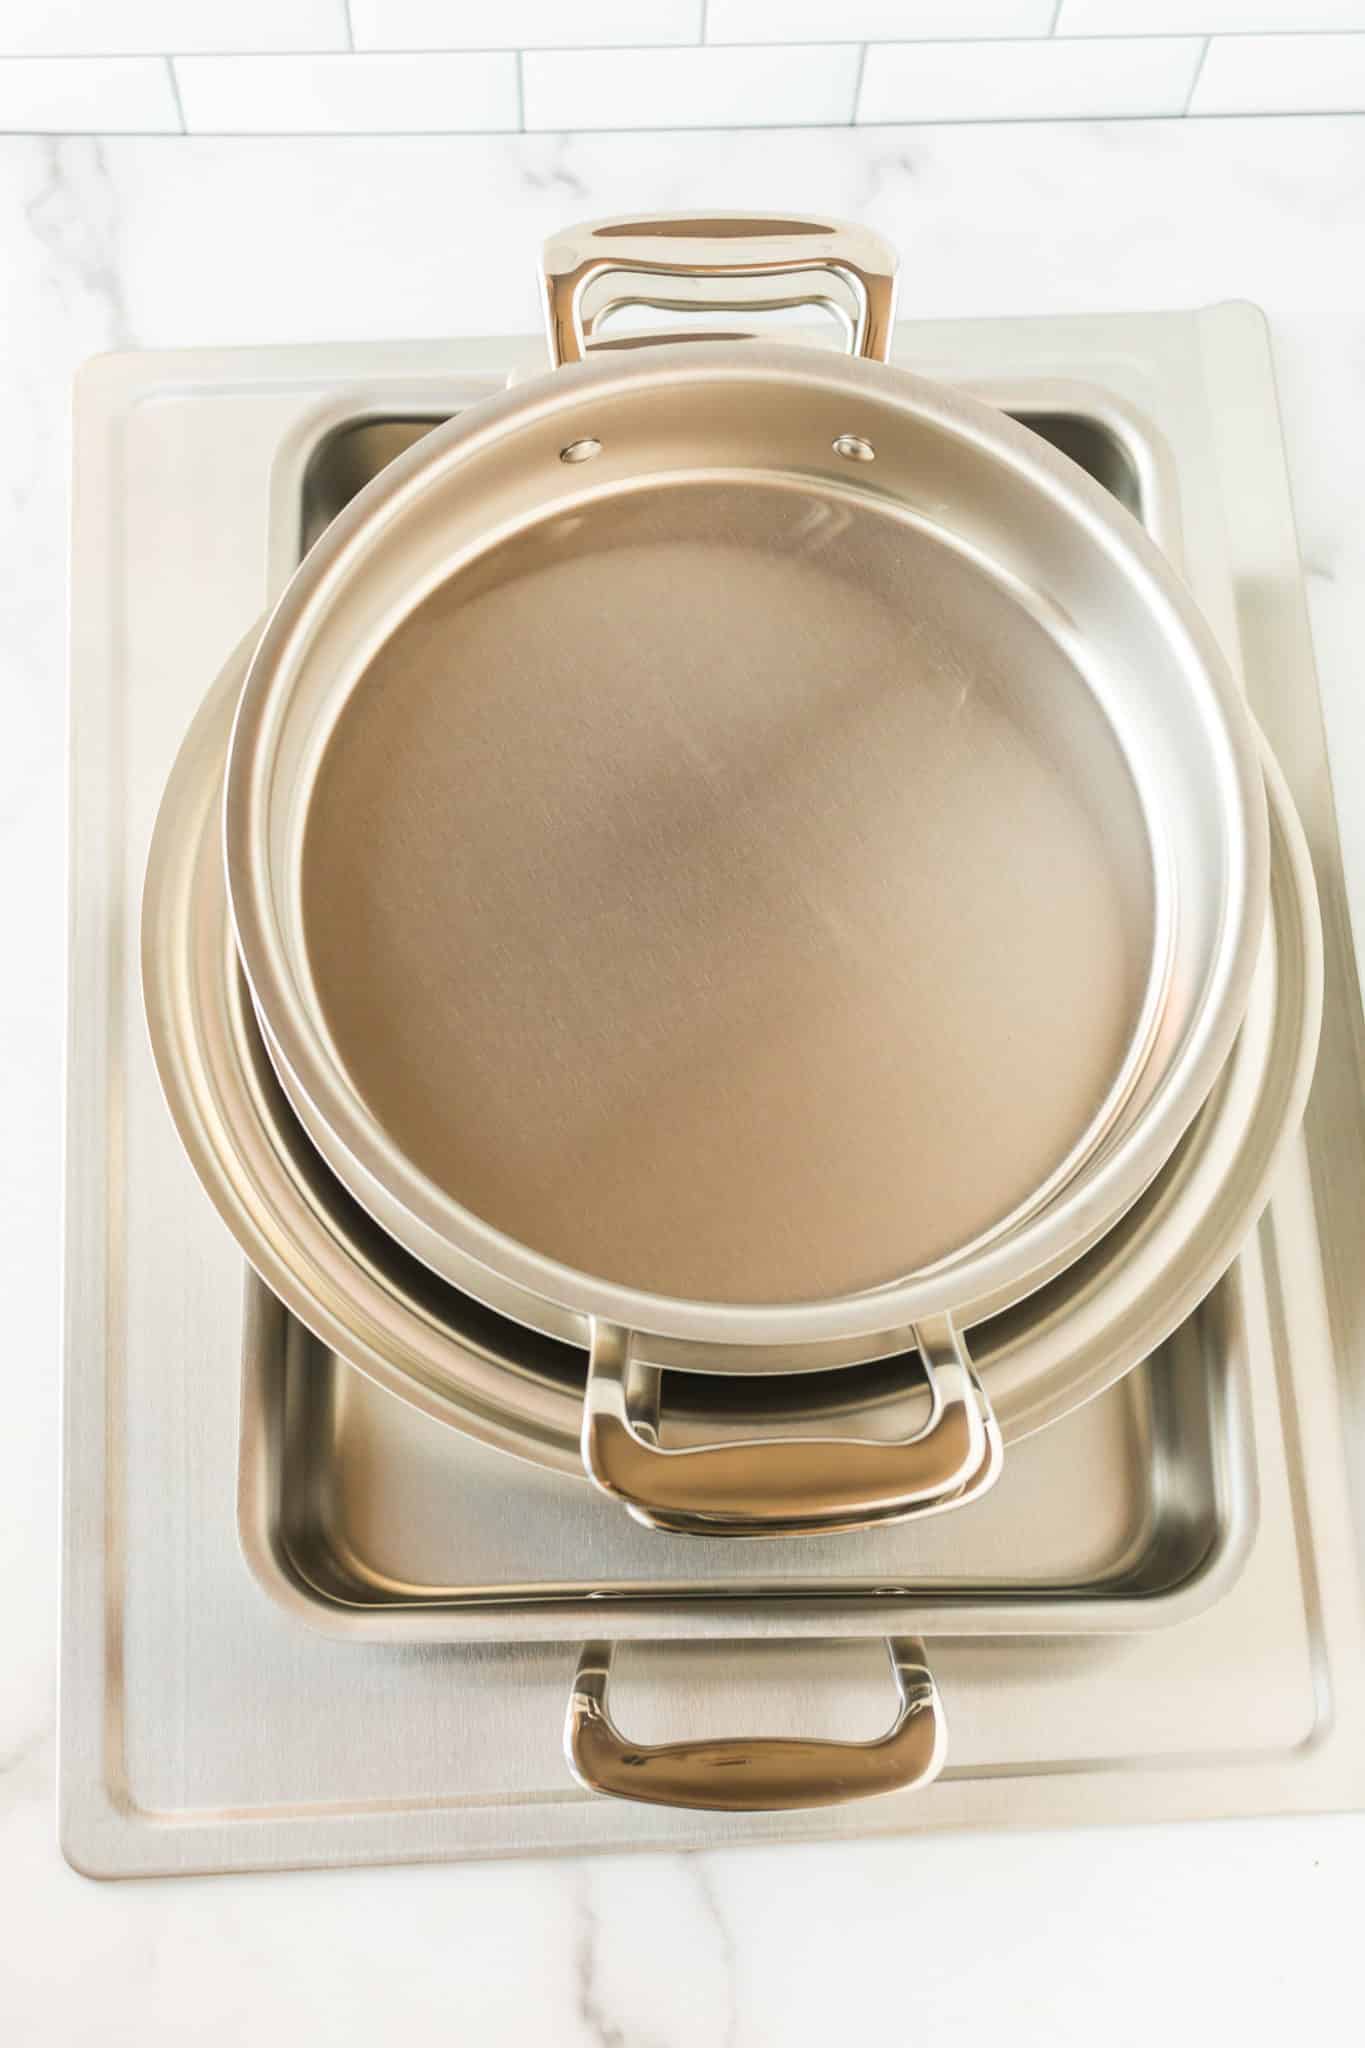 https://www.cleaneatingkitchen.com/wp-content/uploads/2020/12/best-stainless-steel-cookware-3-scaled.jpg